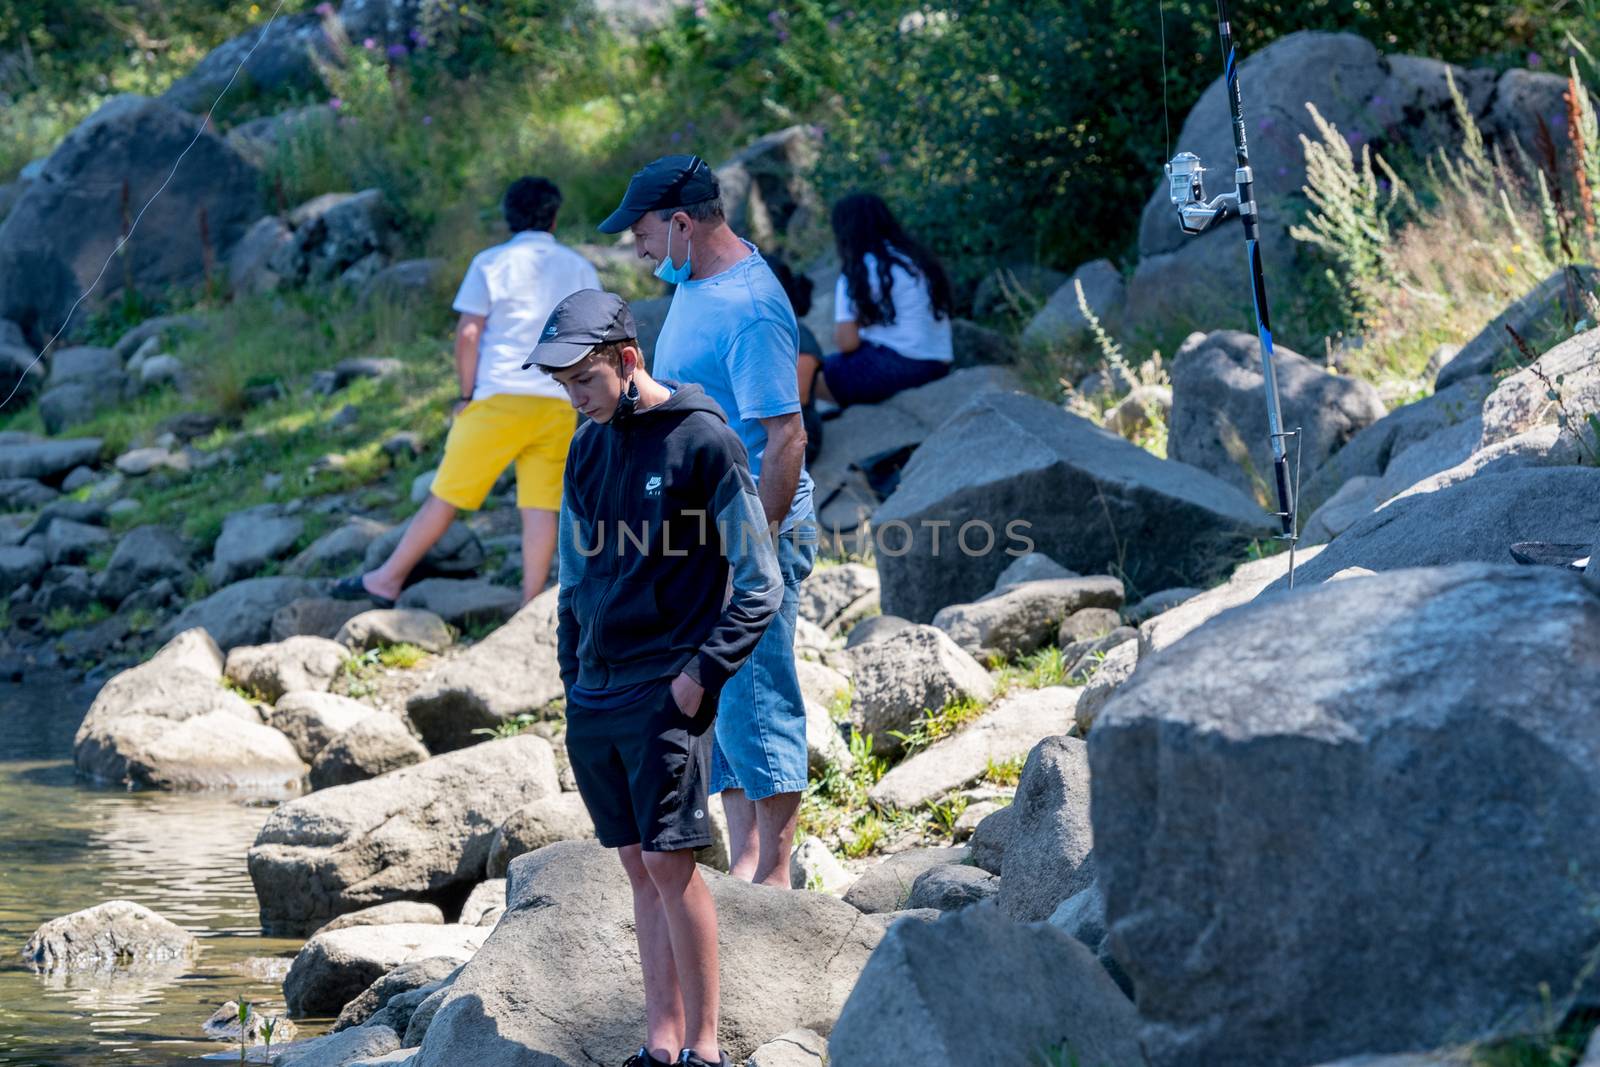 Escaldes Engodany, Andorra : 20 August 2020 : Tourists enjoying the Summer Afternoon at Lake Engolasters in the Pyrenees. Escaldes Engordany, Andorra in summer 2020